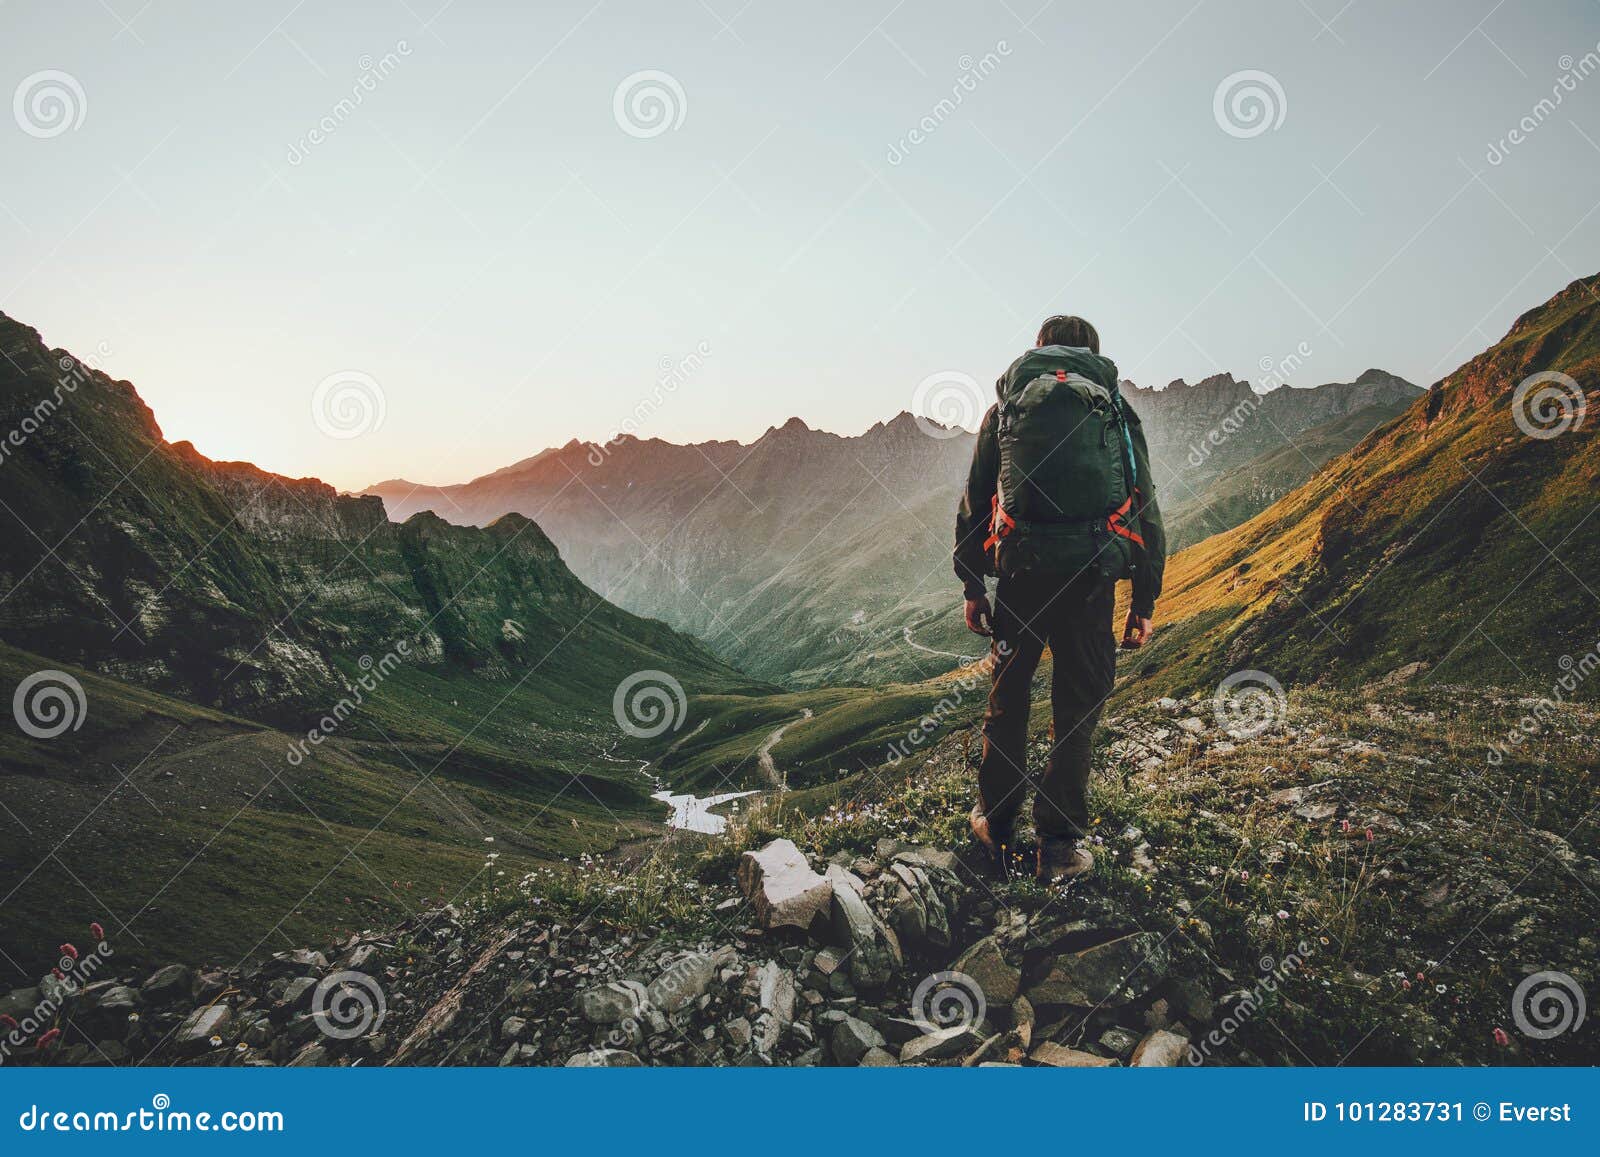 man hiking at sunset mountains with heavy backpack